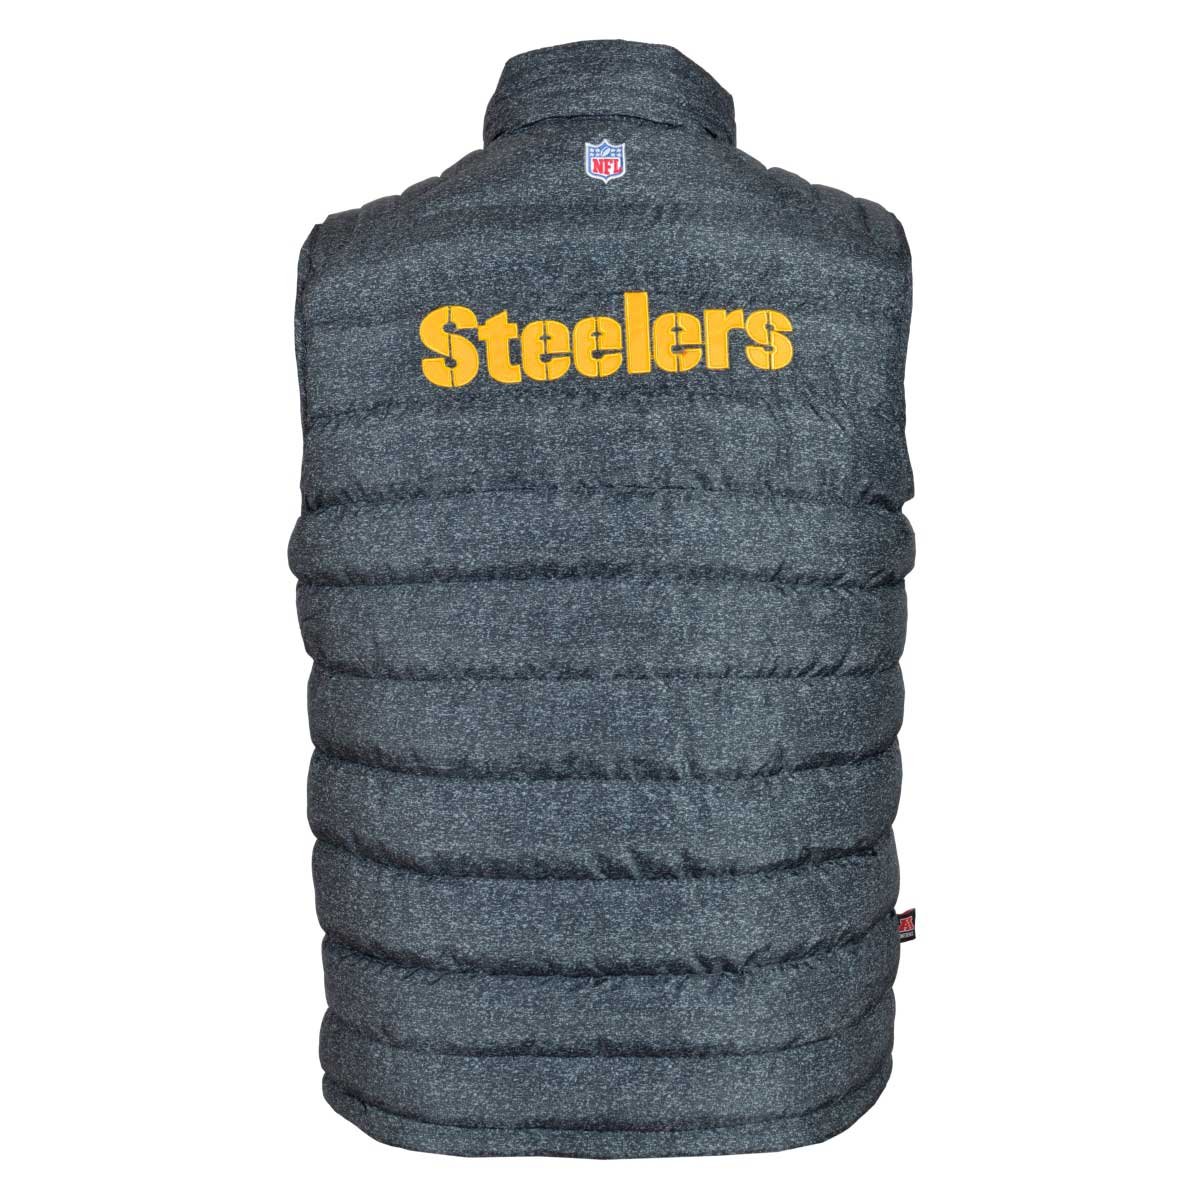 Chaleco Steelers Nfl - Caballero